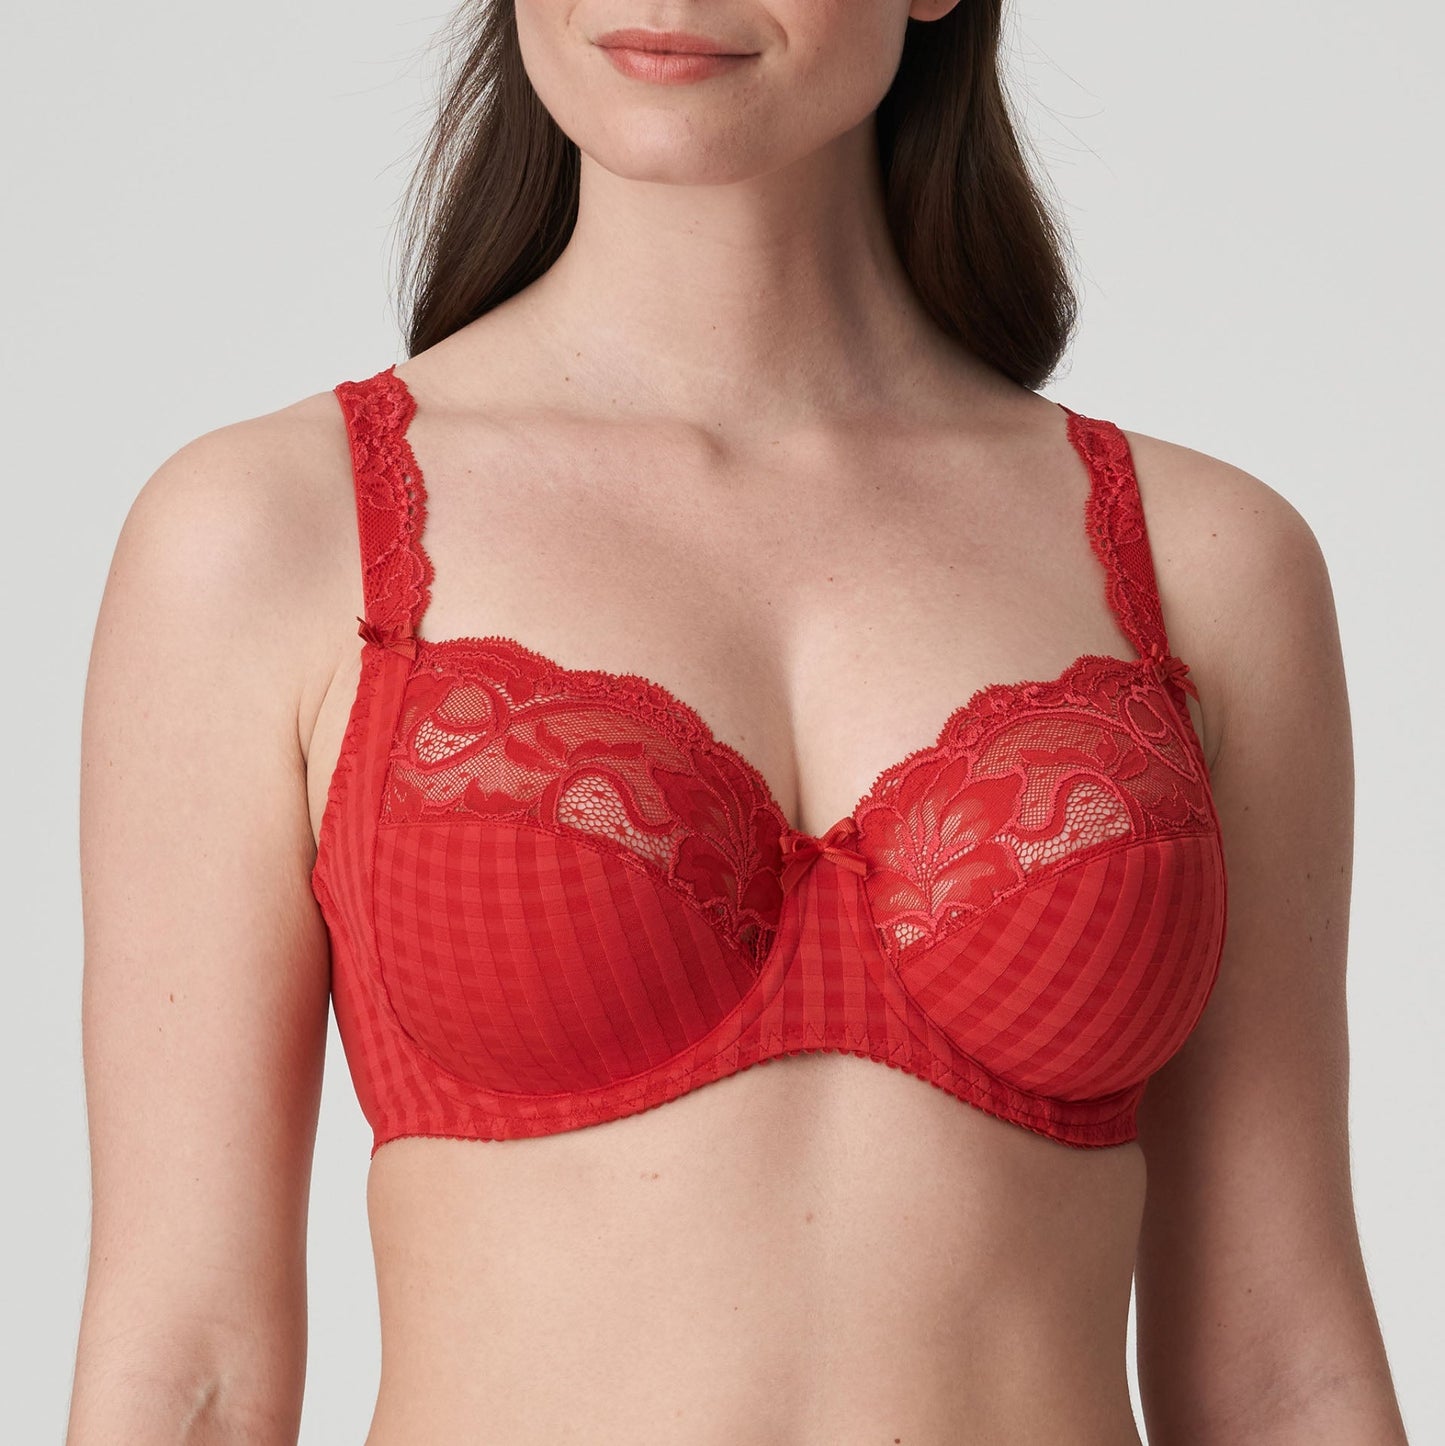     Madison-full-cup-bra-scarlet-front.